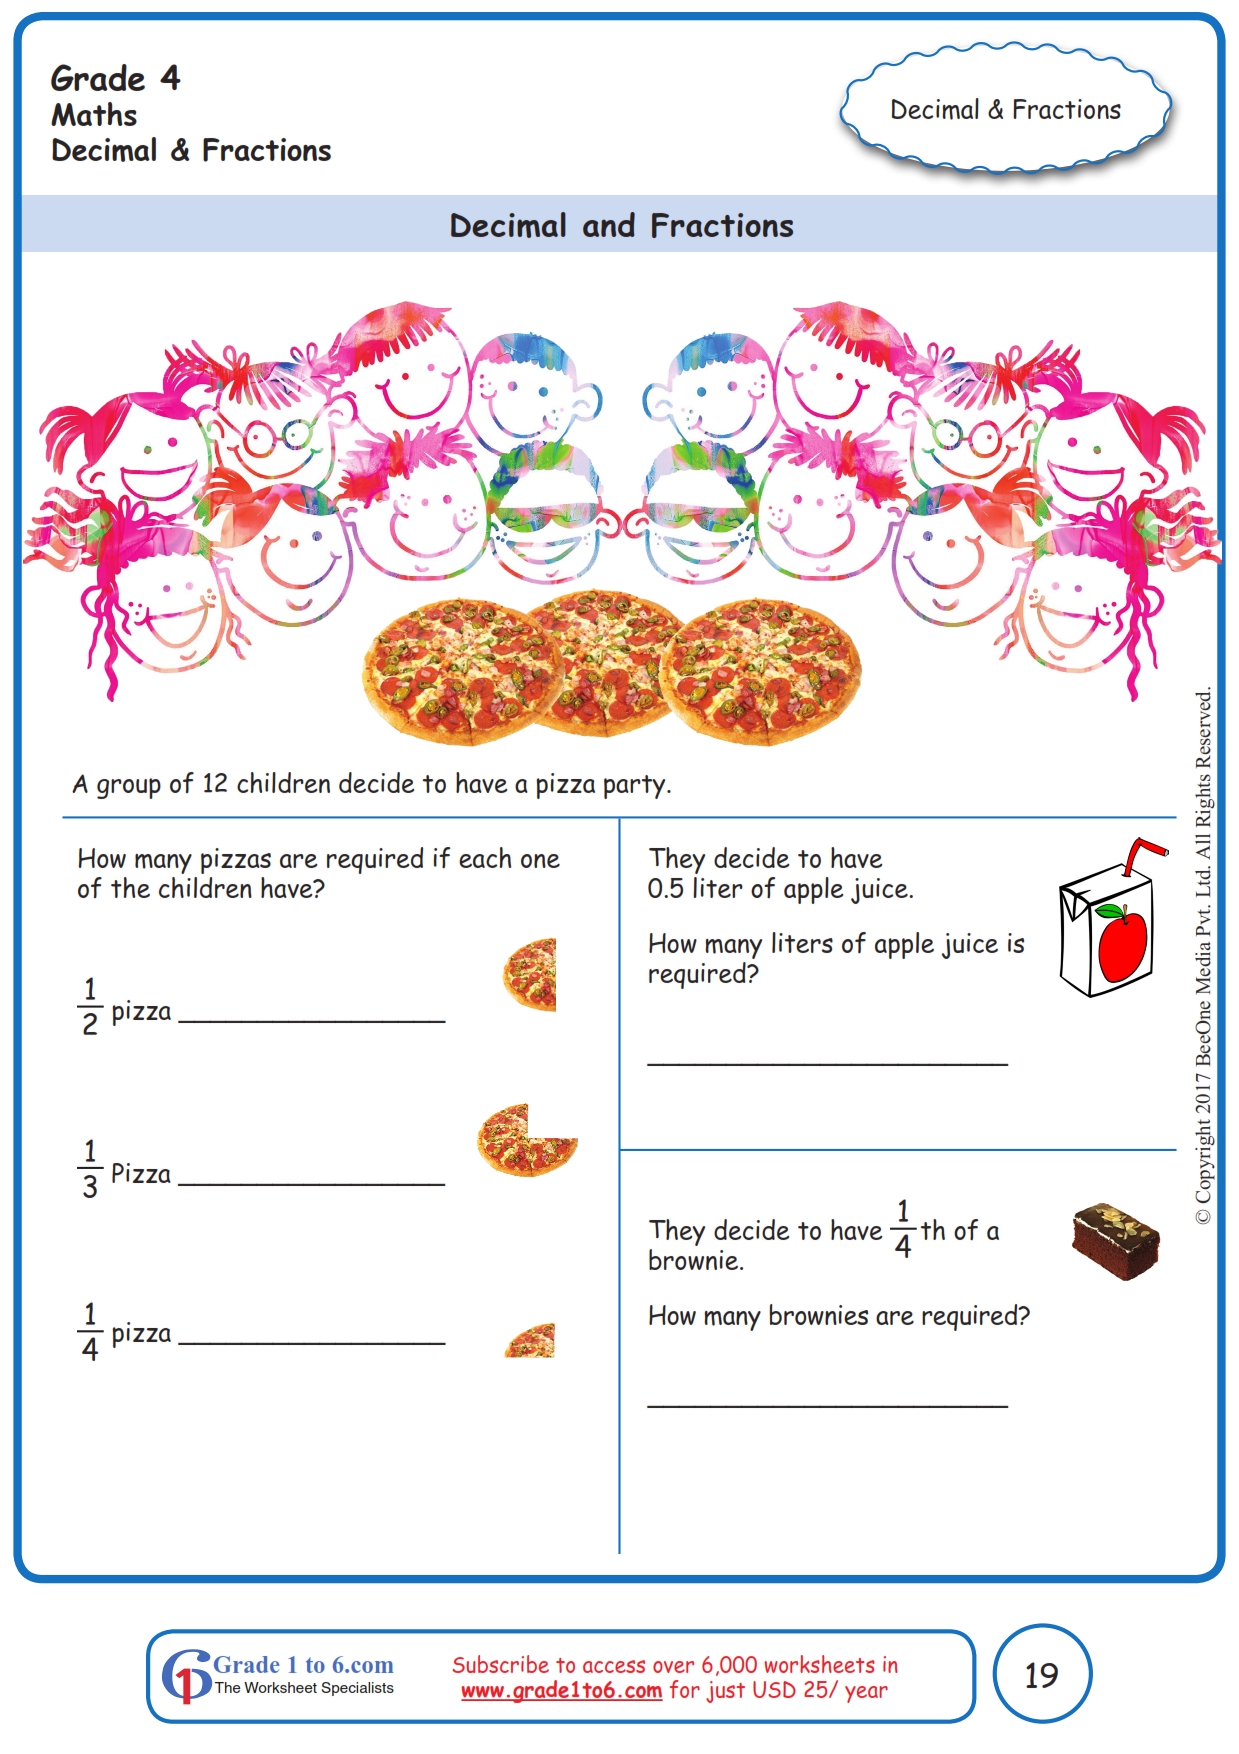 grade-4-math-worksheets-convert-decimals-to-mixed-numbers-k5-learning-converting-fractions-and